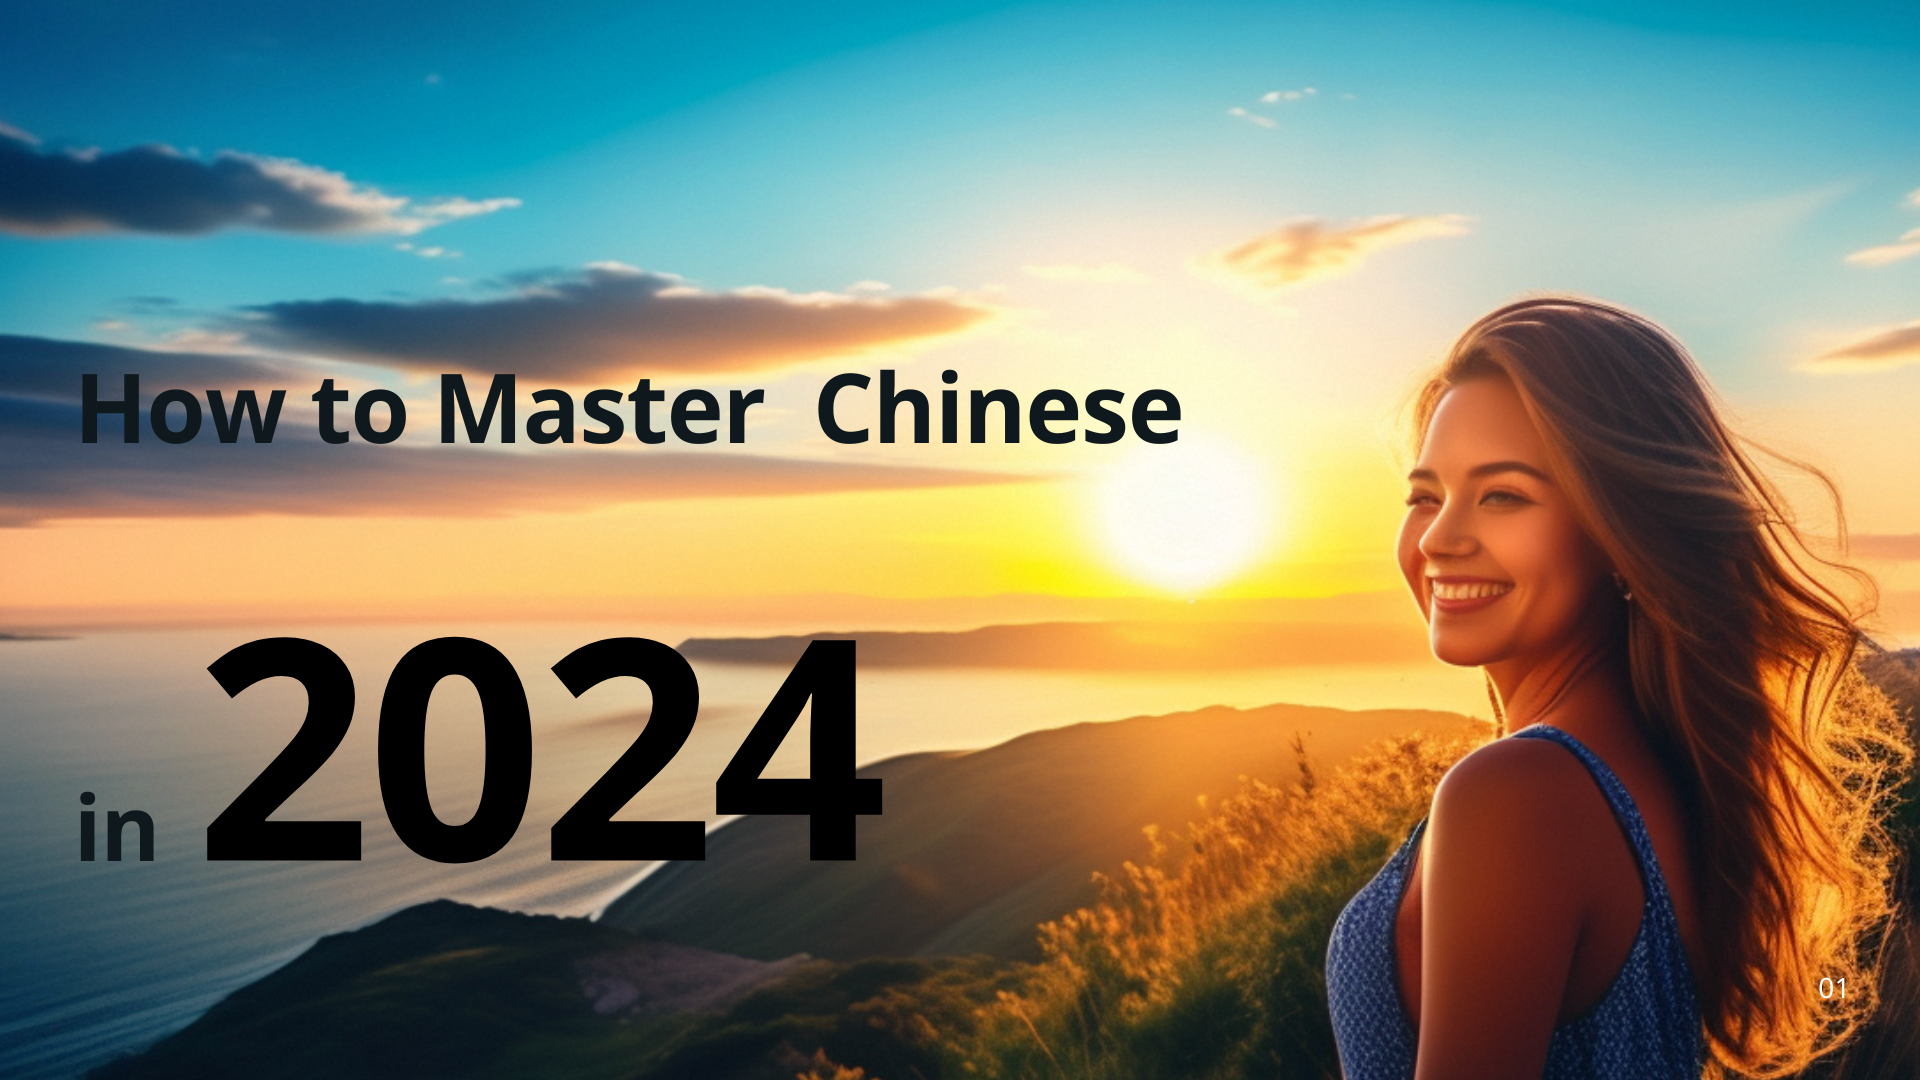 learn more about Echineselearning in 2024